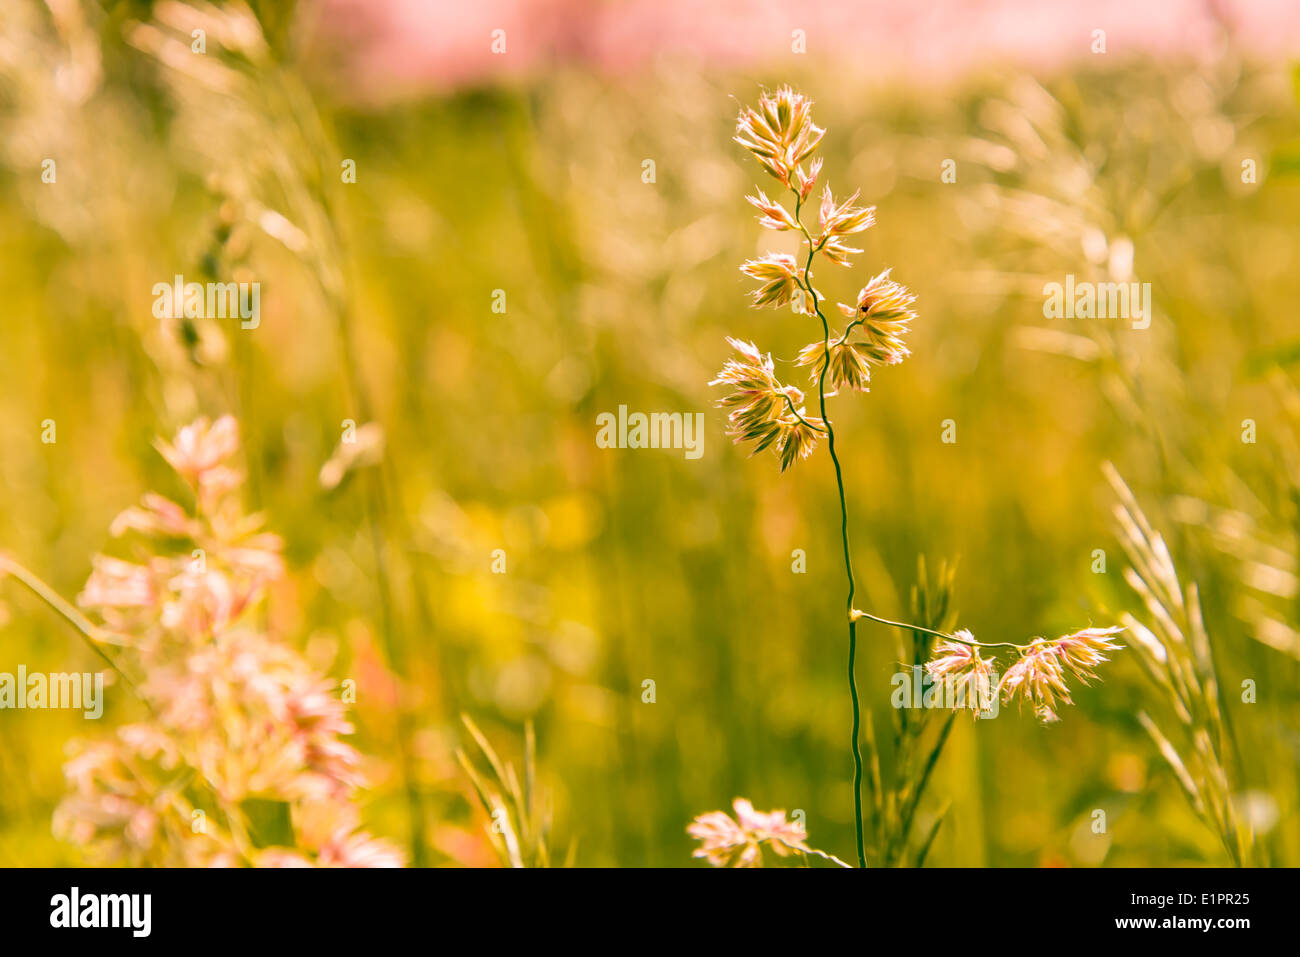 Gramineae herbs moved by the wind in a meadow under the warm spring sun Stock Photo